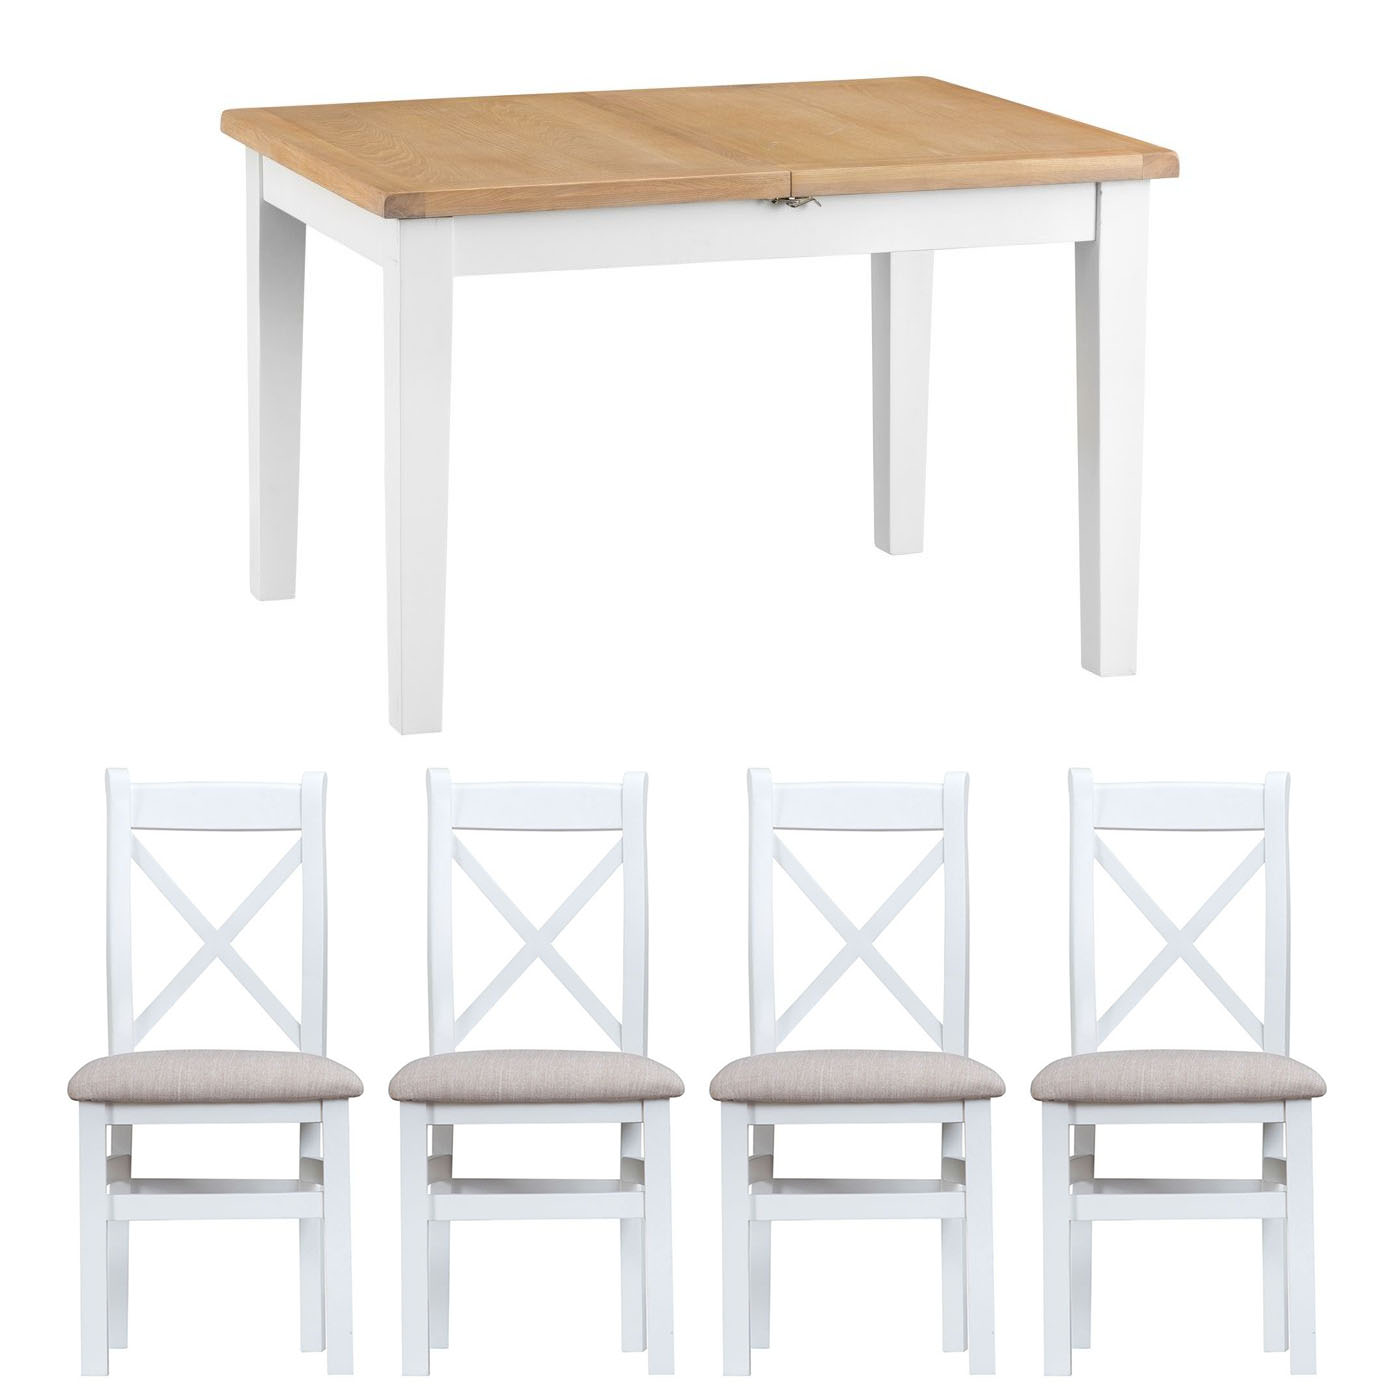 Henley White 120-165cm Table with x4 Cross Back Chairs